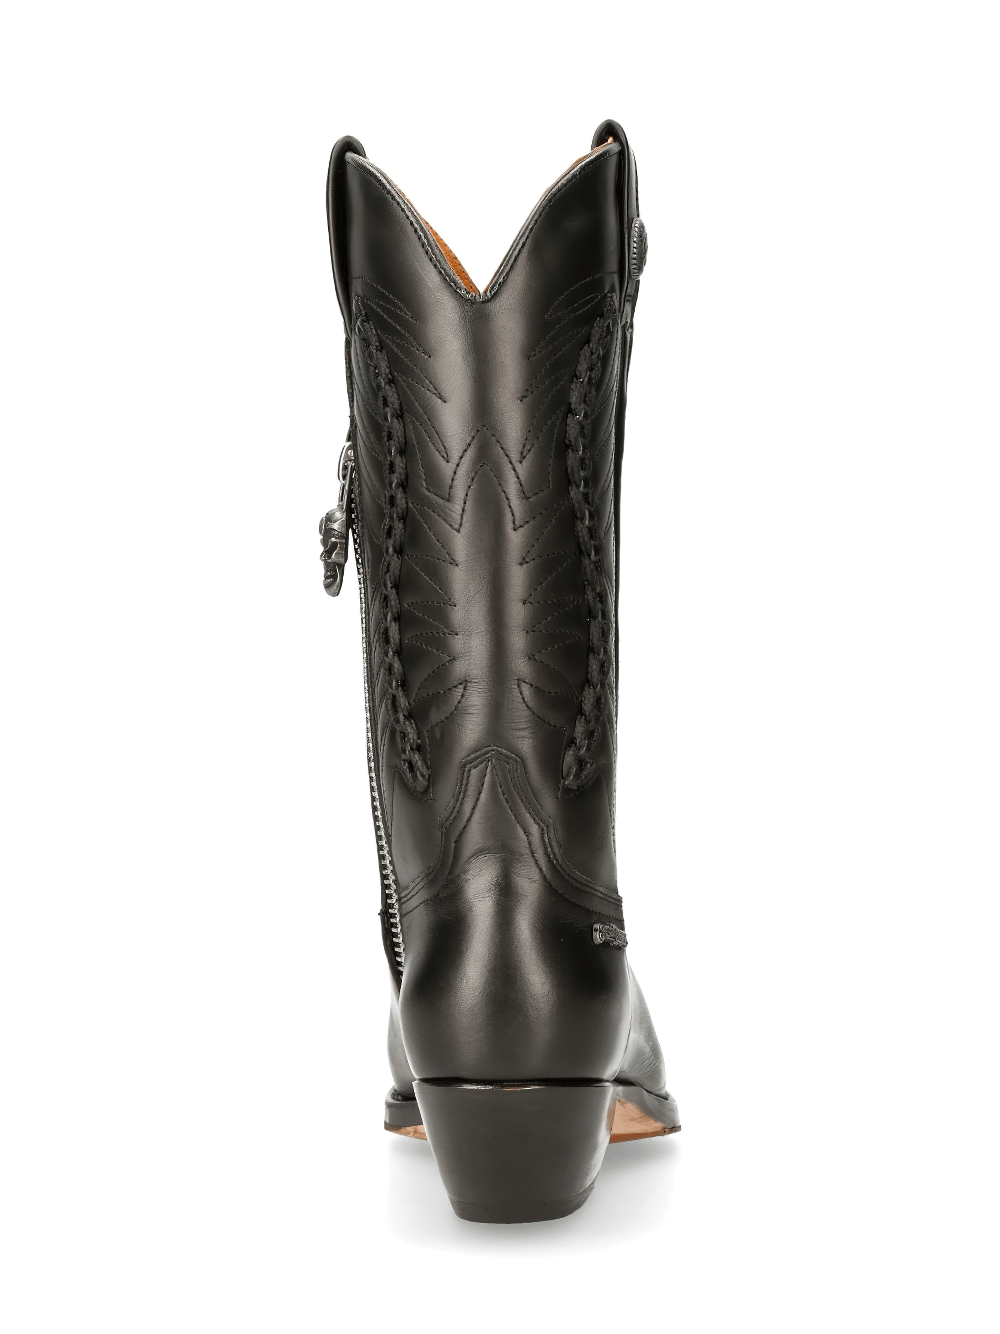 NEW ROCK Zip-Up Black Leather Cowboy Boots for Men